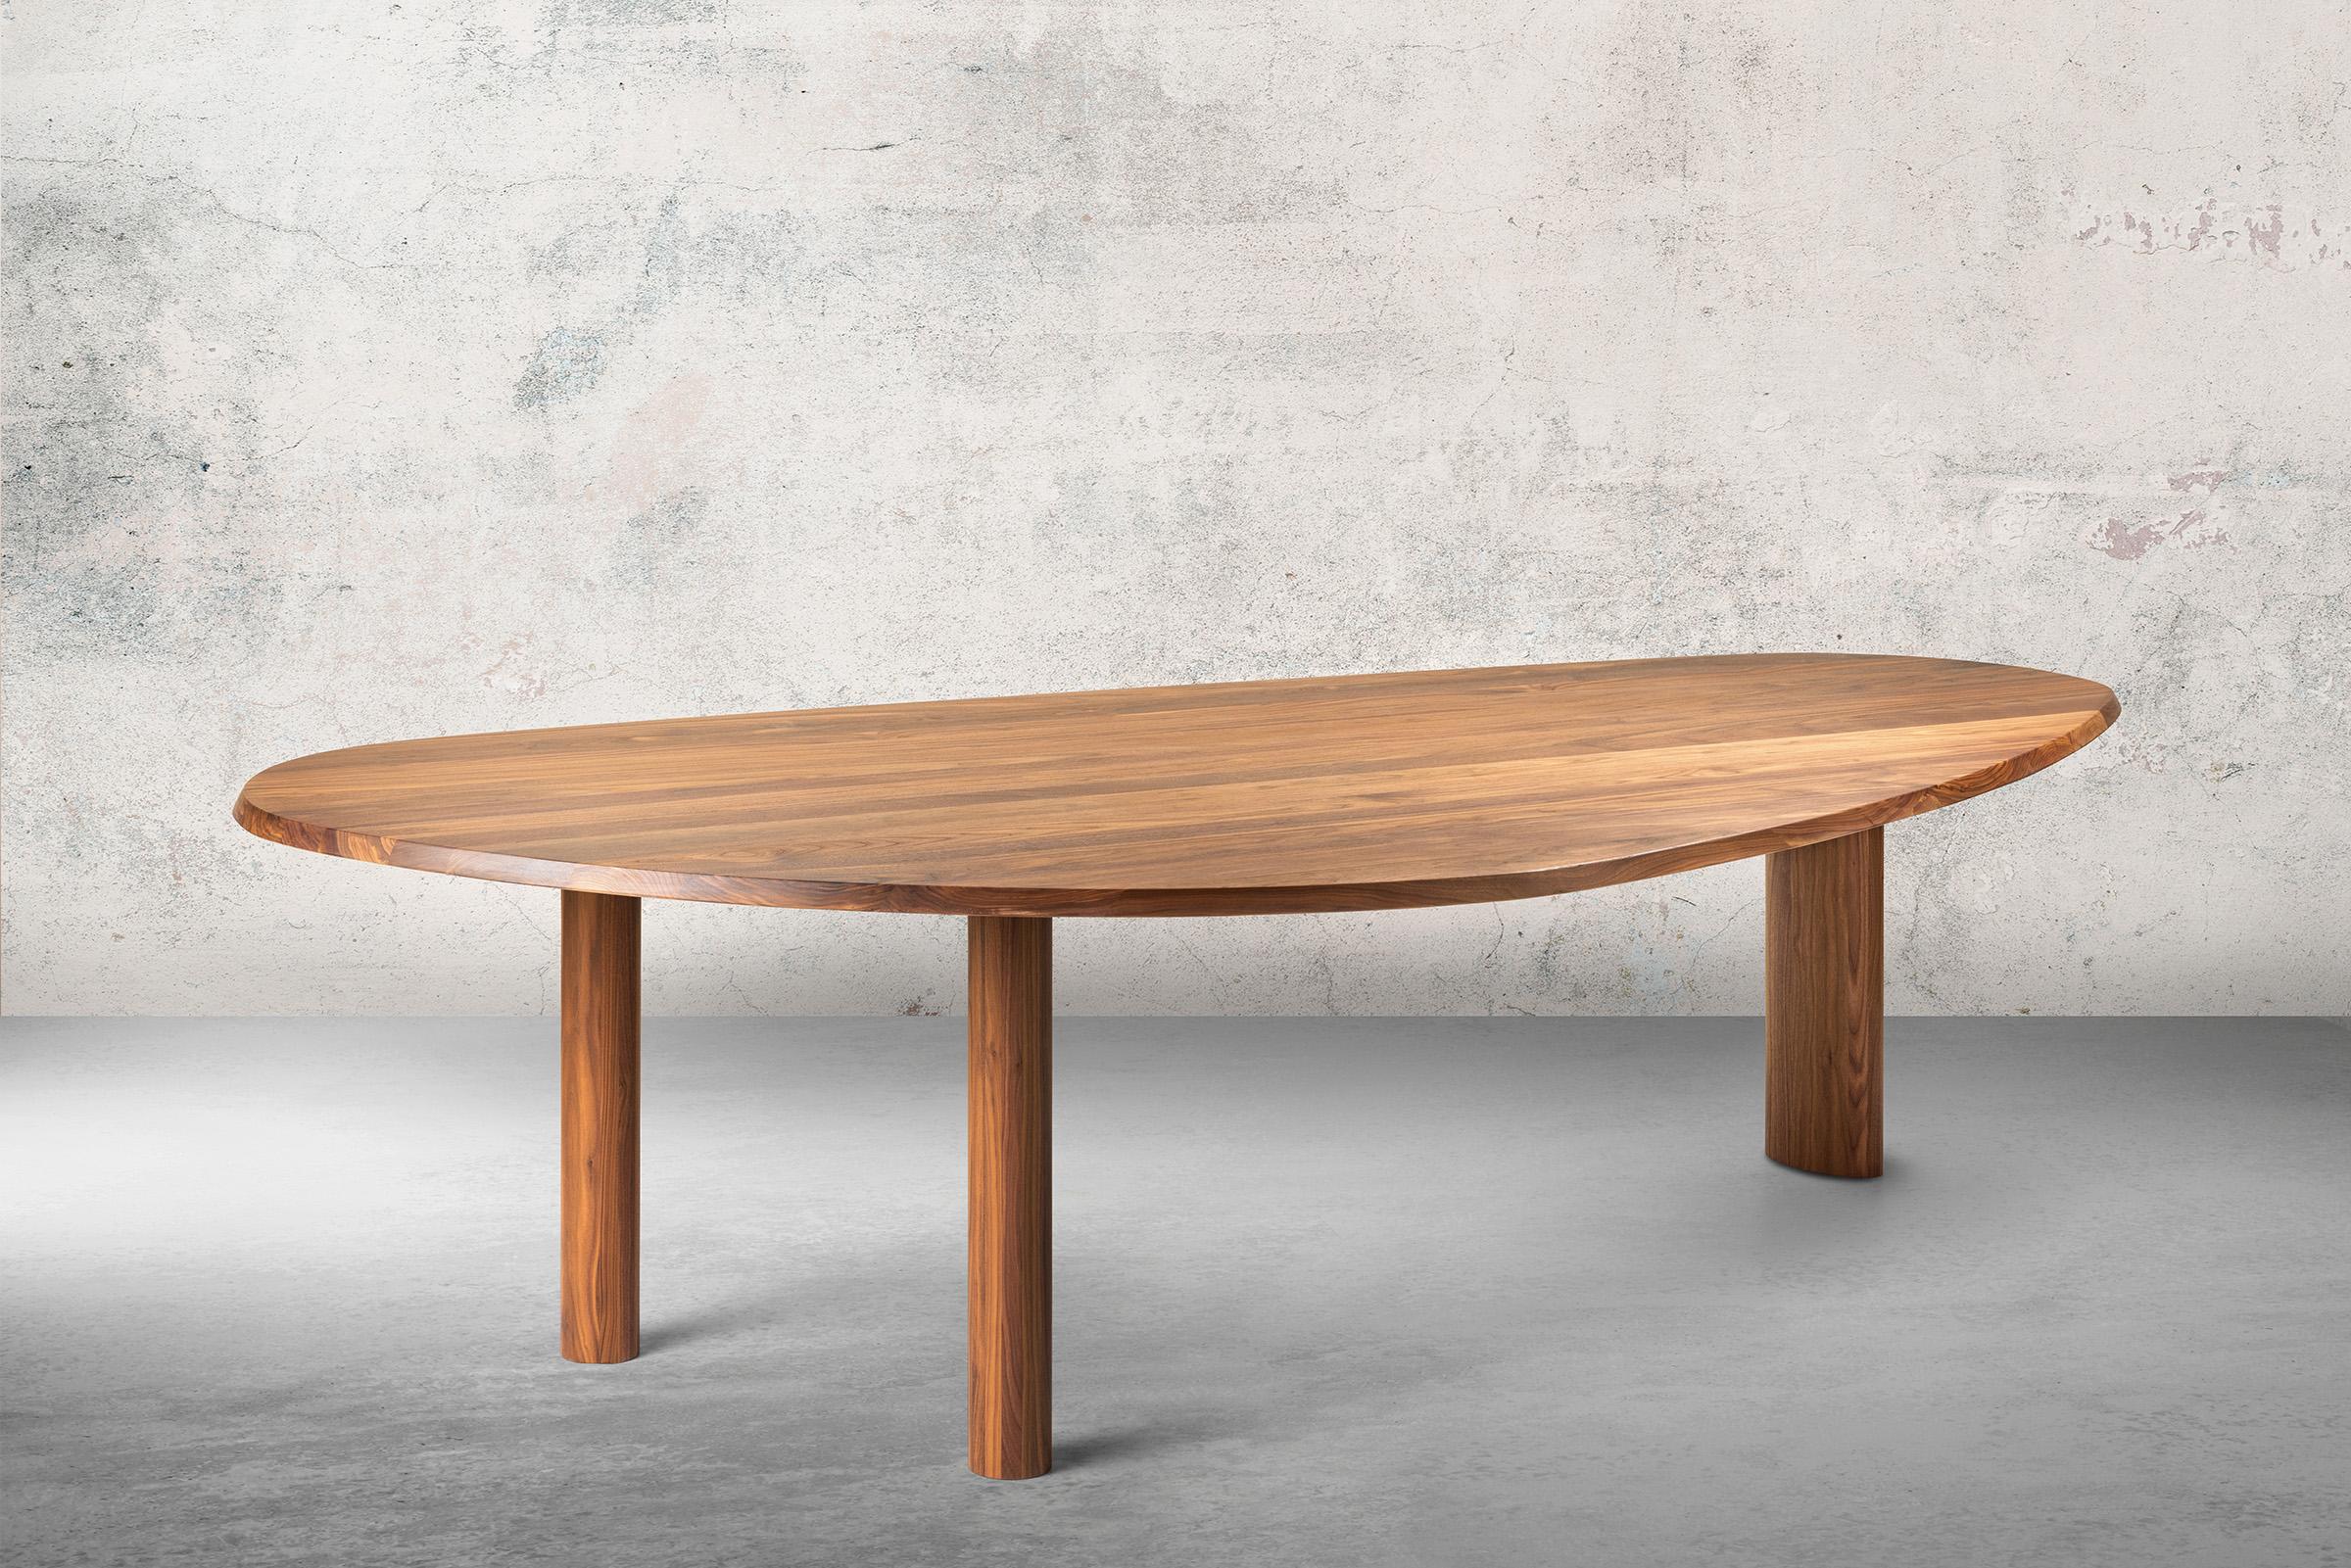 Walnut Kluskens Pernette Dining Table For Sale